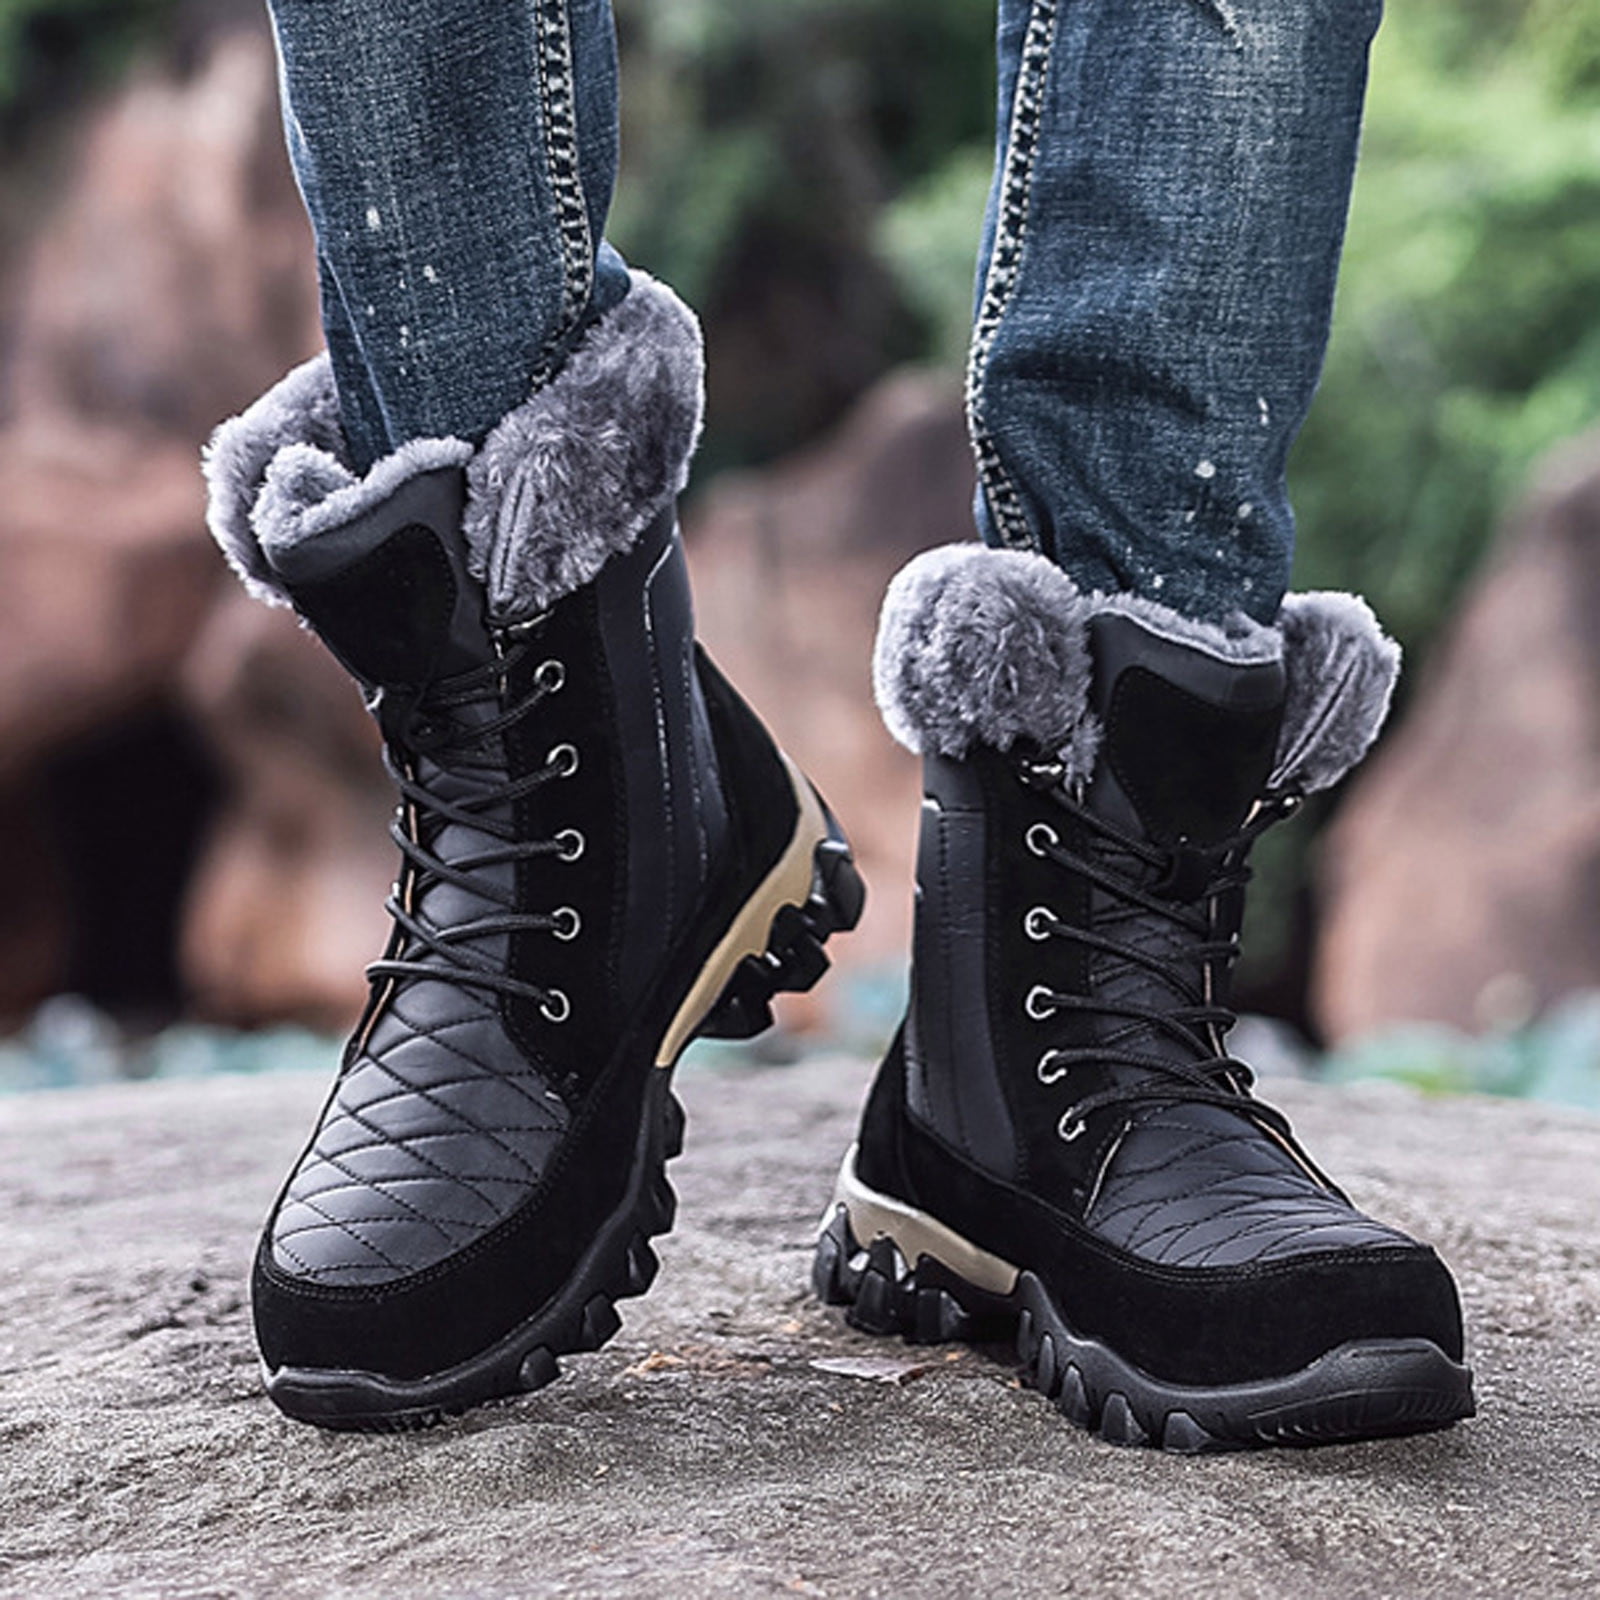 Winter Snow Boots For Men And Women, Thick Warm Fur Lined Waterproof Boots,  High-top Anti-slippery Large Size Shoes